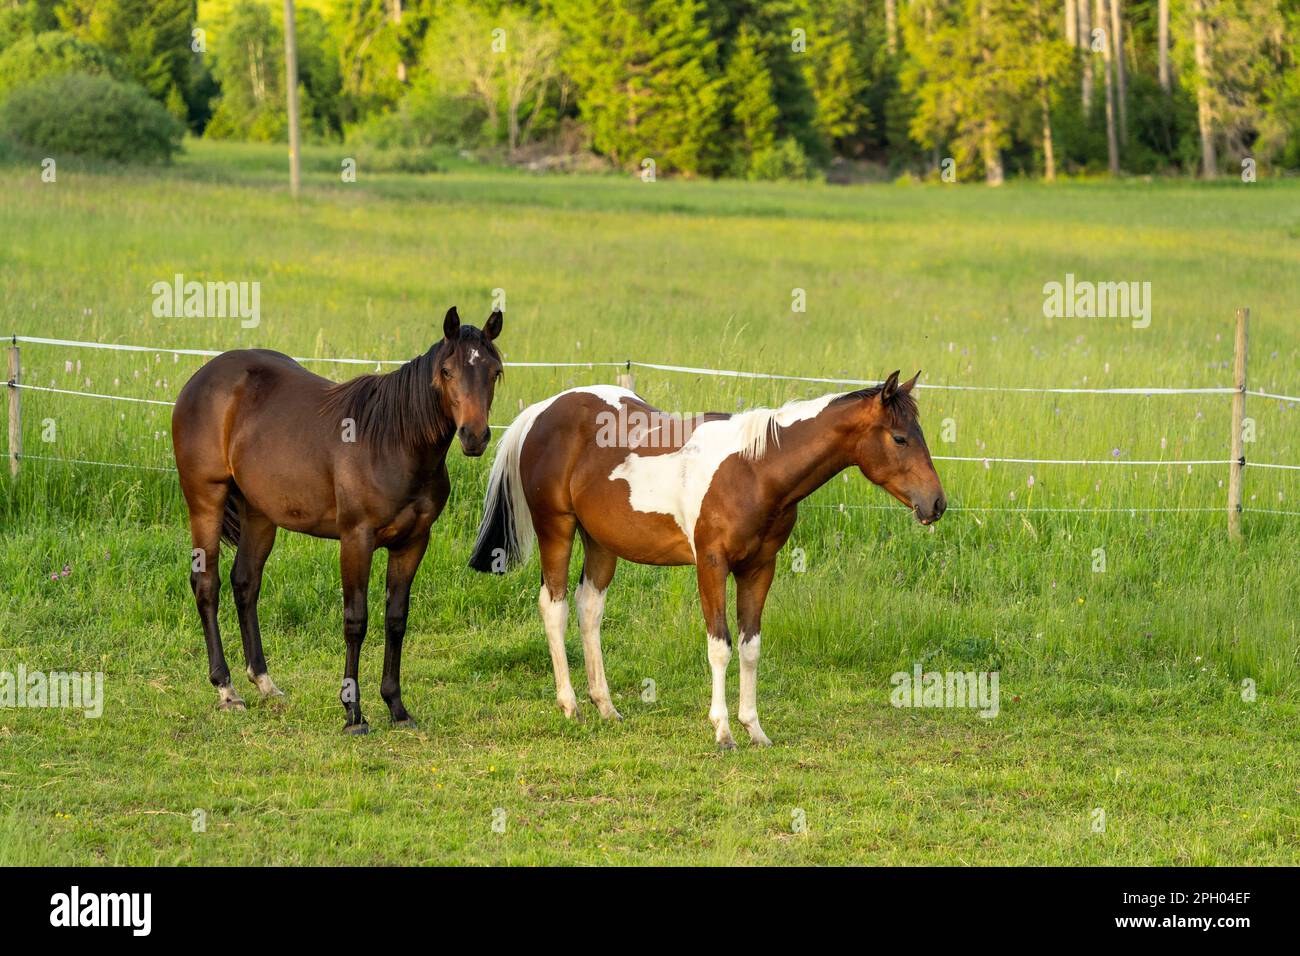 Two young horses on a meadow, one piebald and one bay. It is to see that the back part of the young horses is bigger than the front part, due to growi Stock Photo